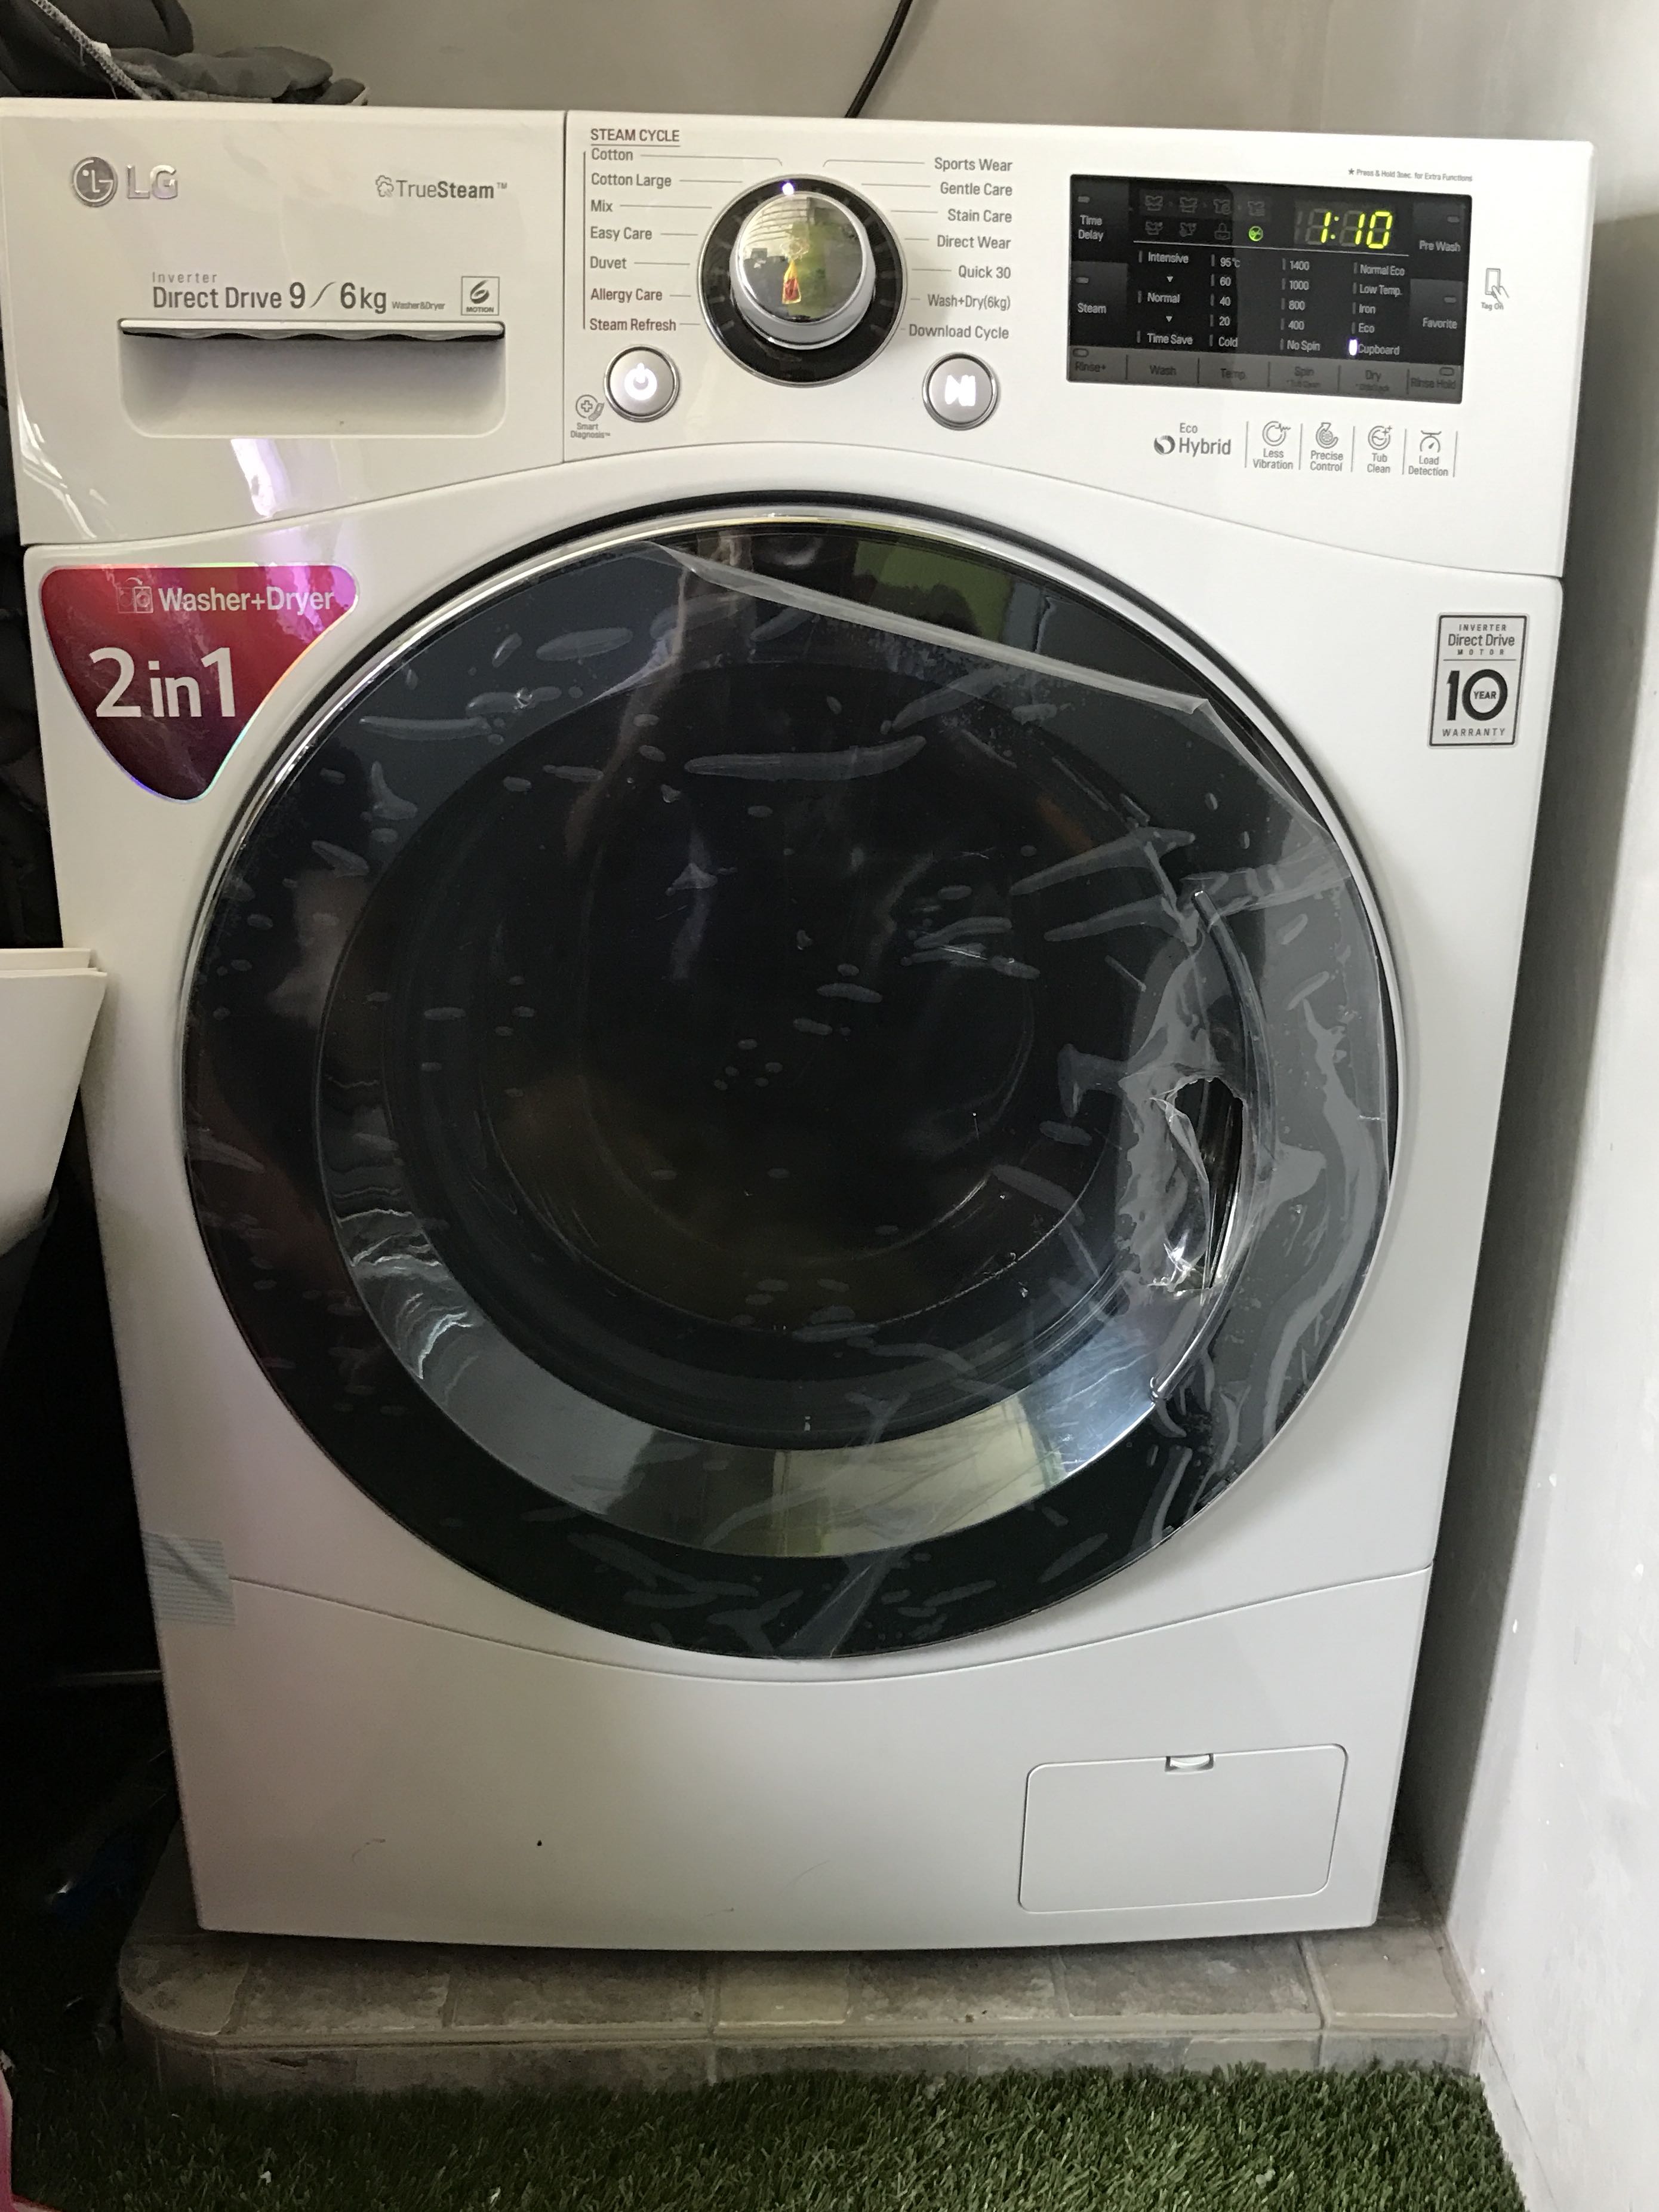 Like new LG Direct Drive 9kg / dryer in 1, TV & Home Appliances, Machines and Dryers on Carousell